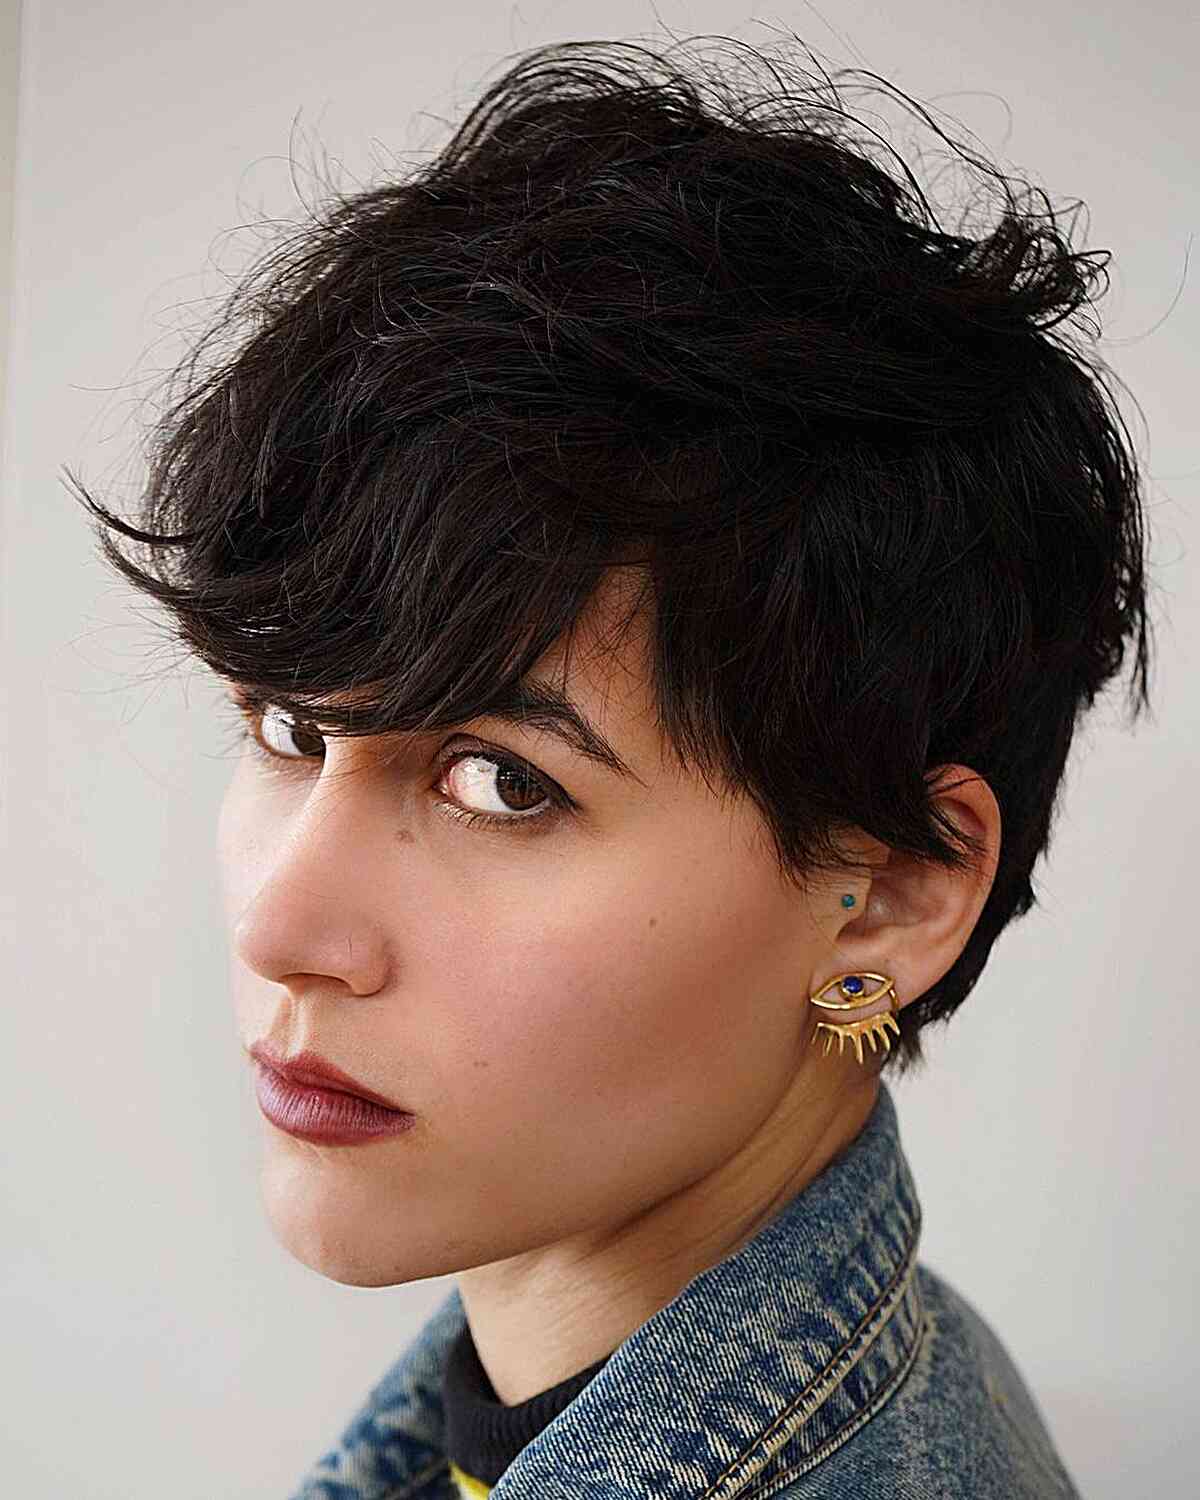 Short Textured Chopped Pixie Cut with Fringe for women with oval face shapes